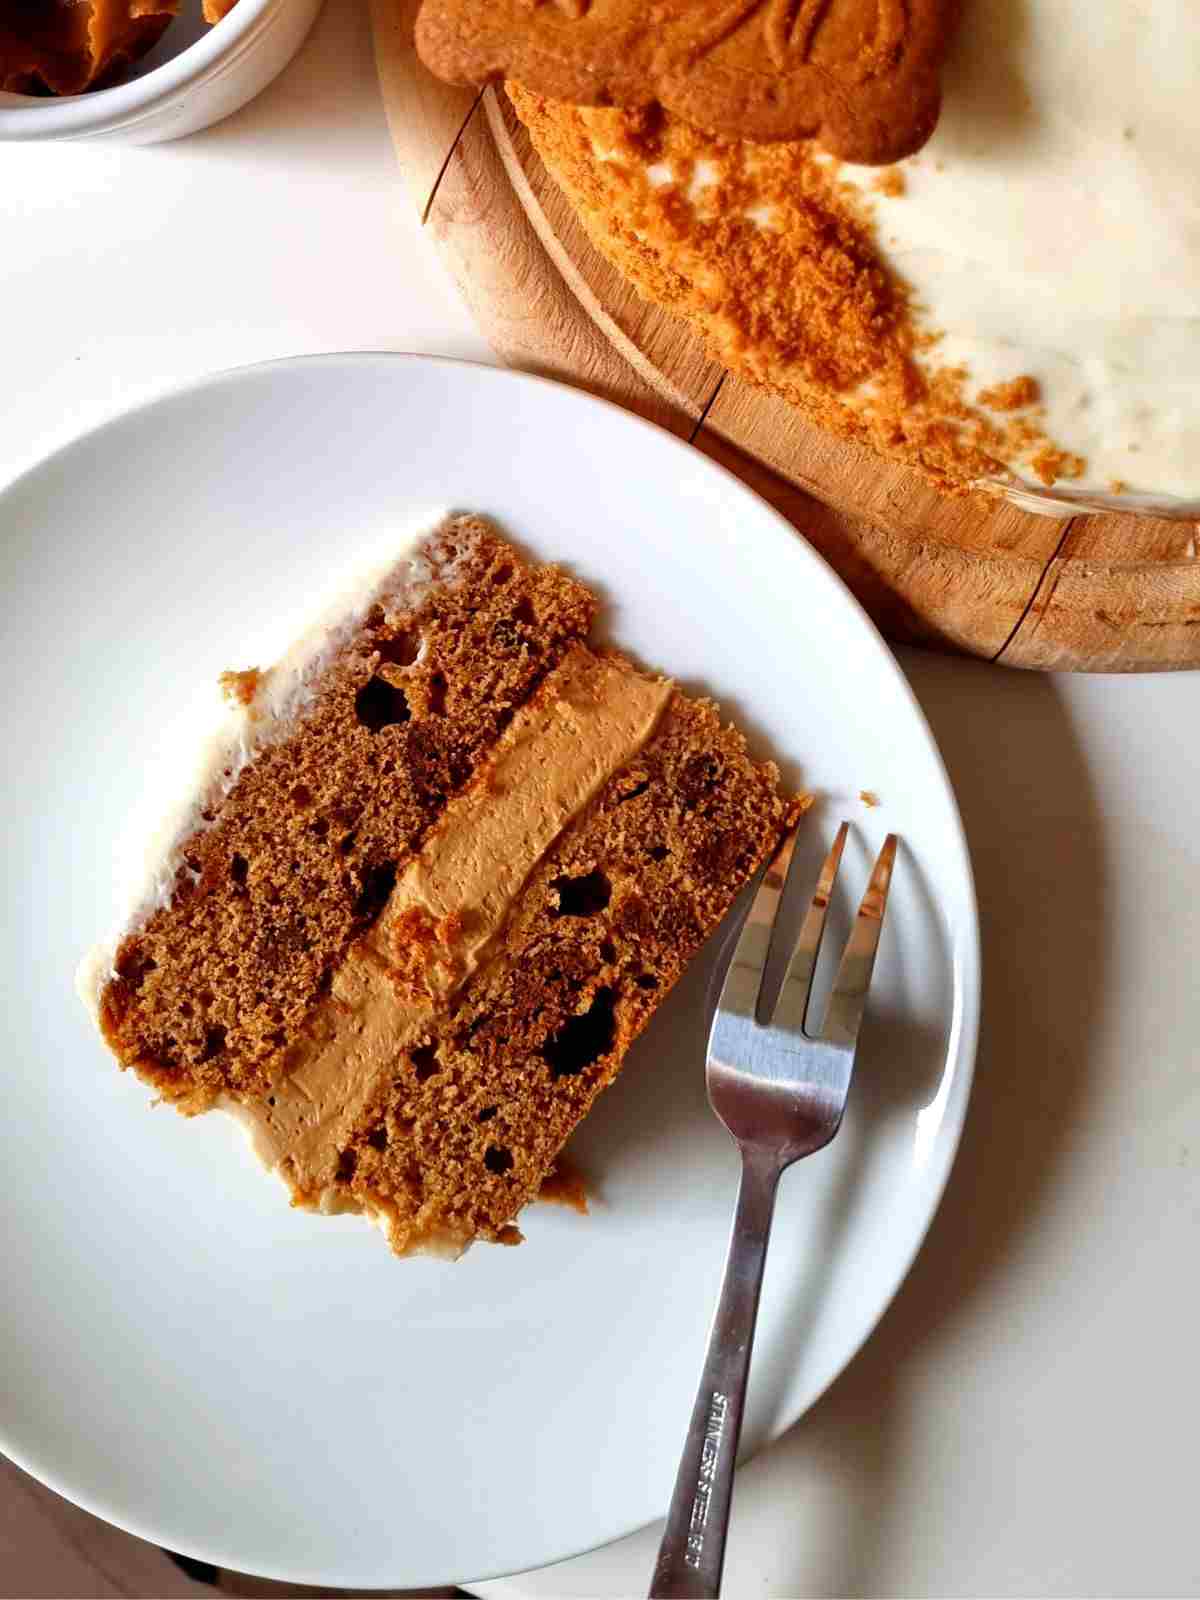 A piece of biscoff birthday cake on a plate.